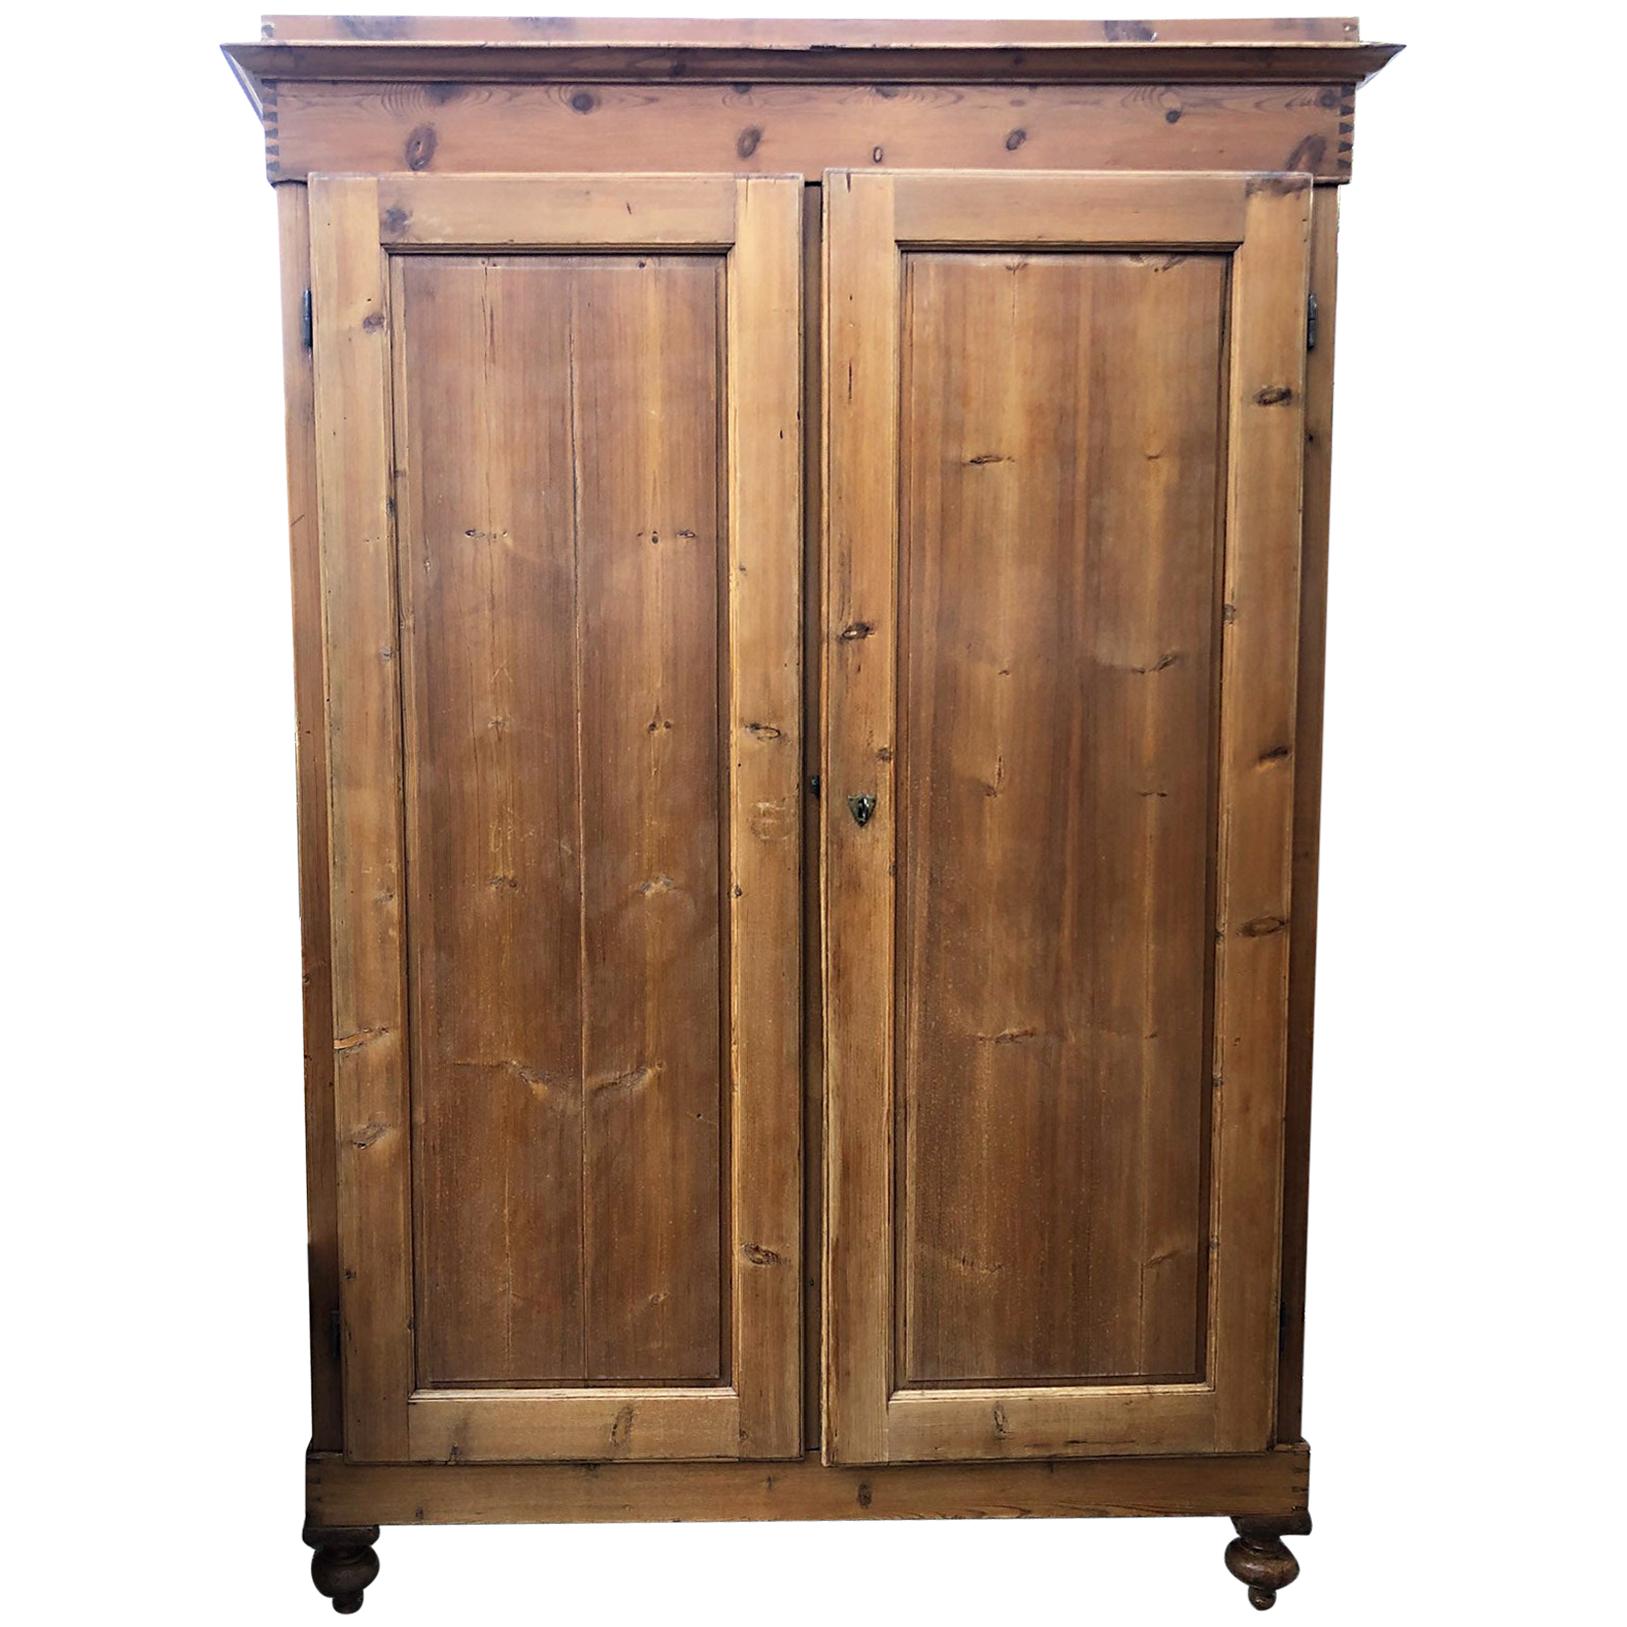 1880s Wardrobe Tuscan Fir with Two Doors Natural Color One Drawer